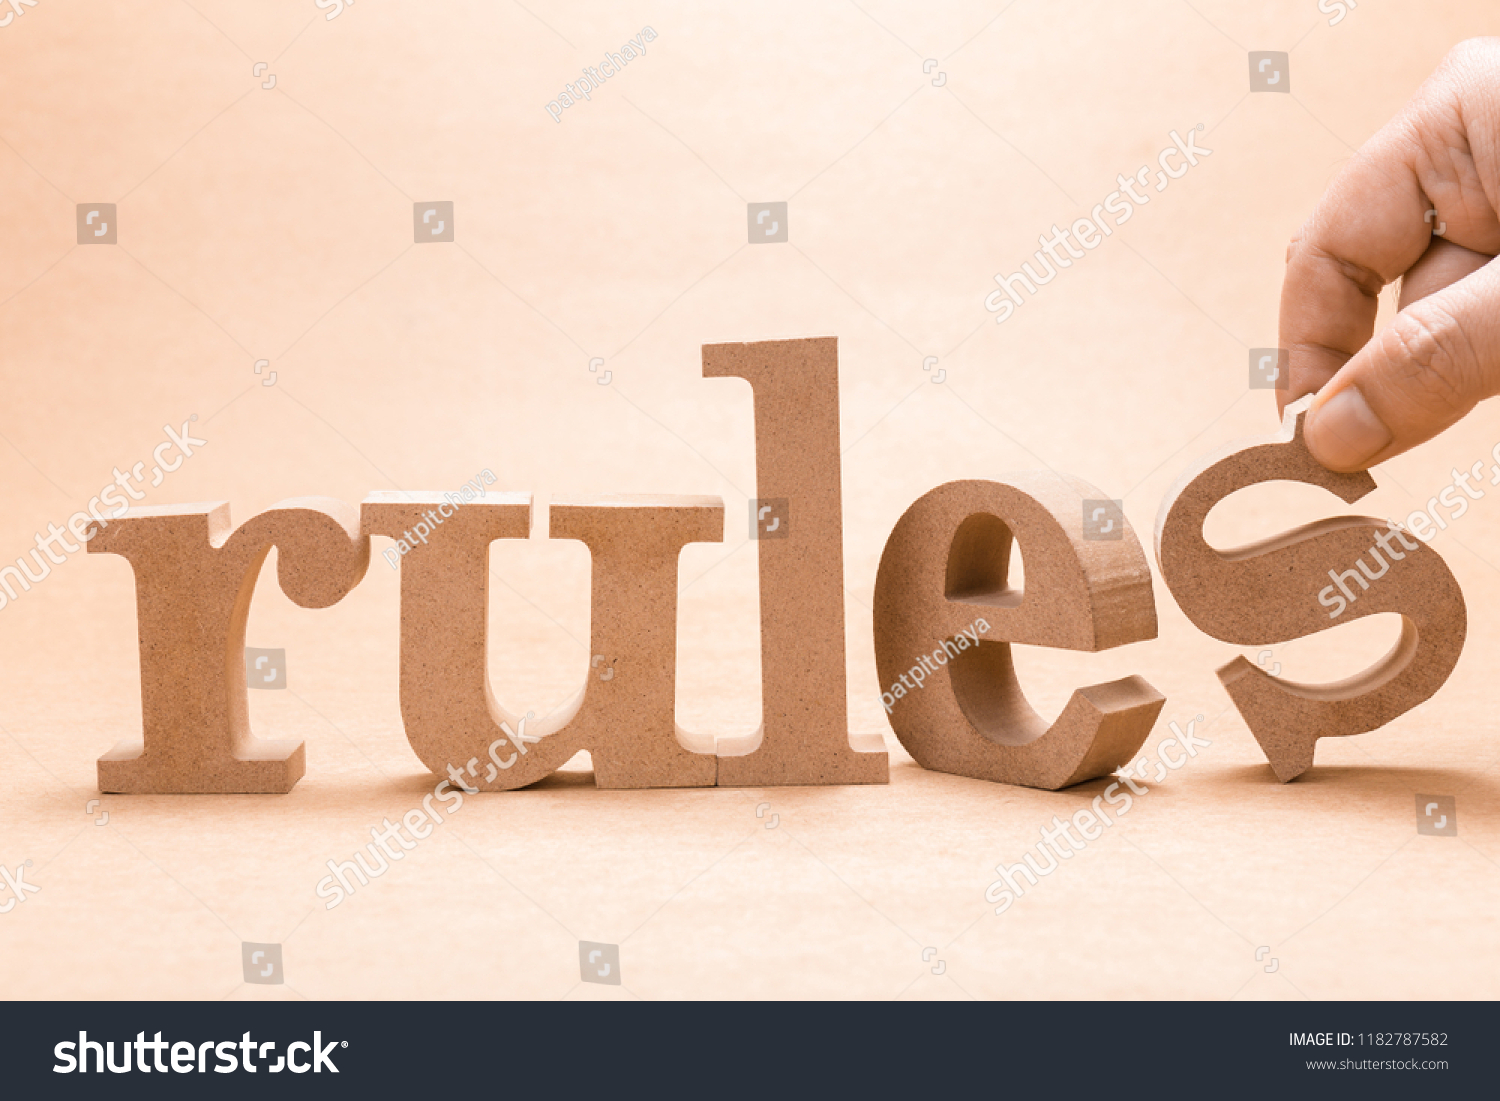 Hand arrange wood letters on brown paper as RULES word #1182787582